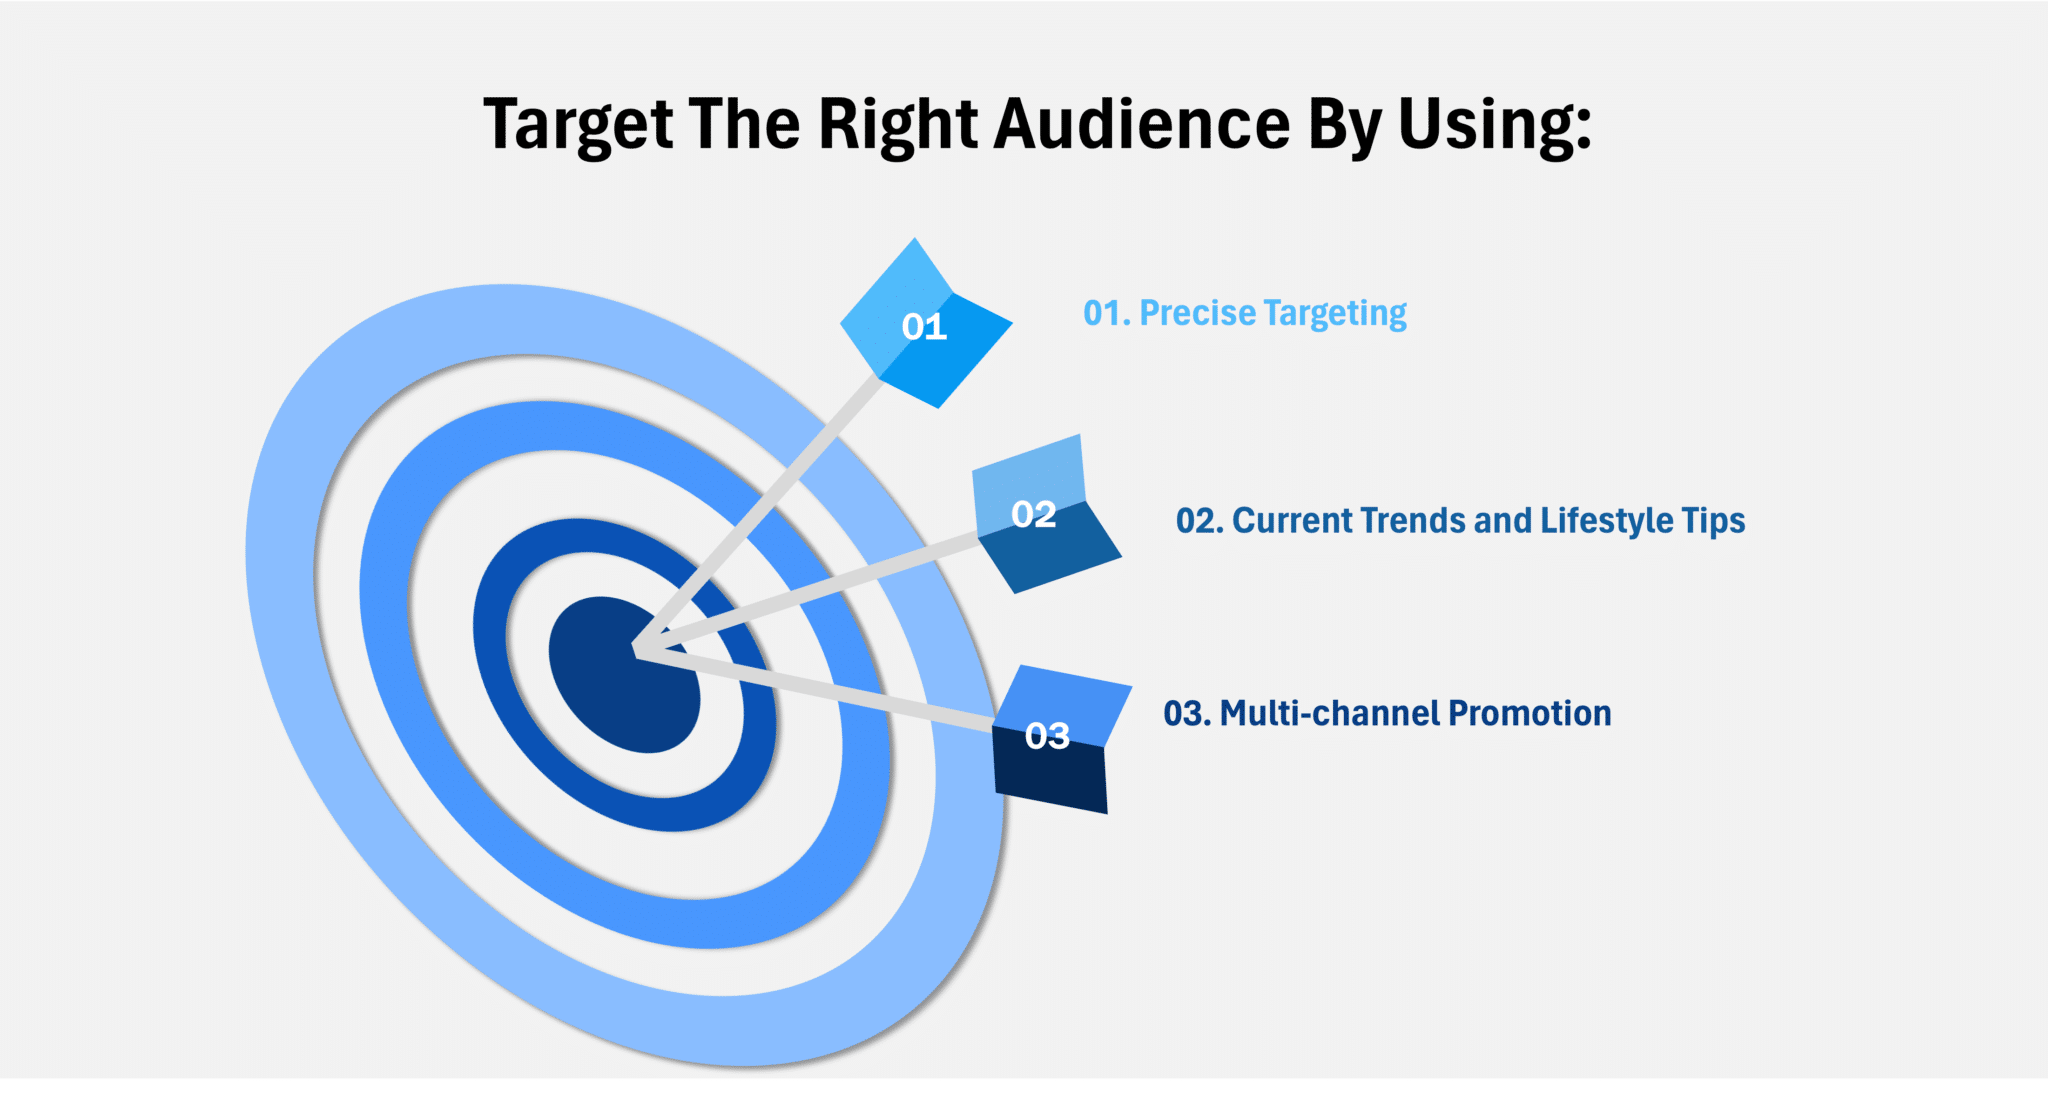 You can target the right audience for your medical spa by keep in mind three things, use precise targeting, stay current with trends and lifestyle tips and use multi channel promotion   